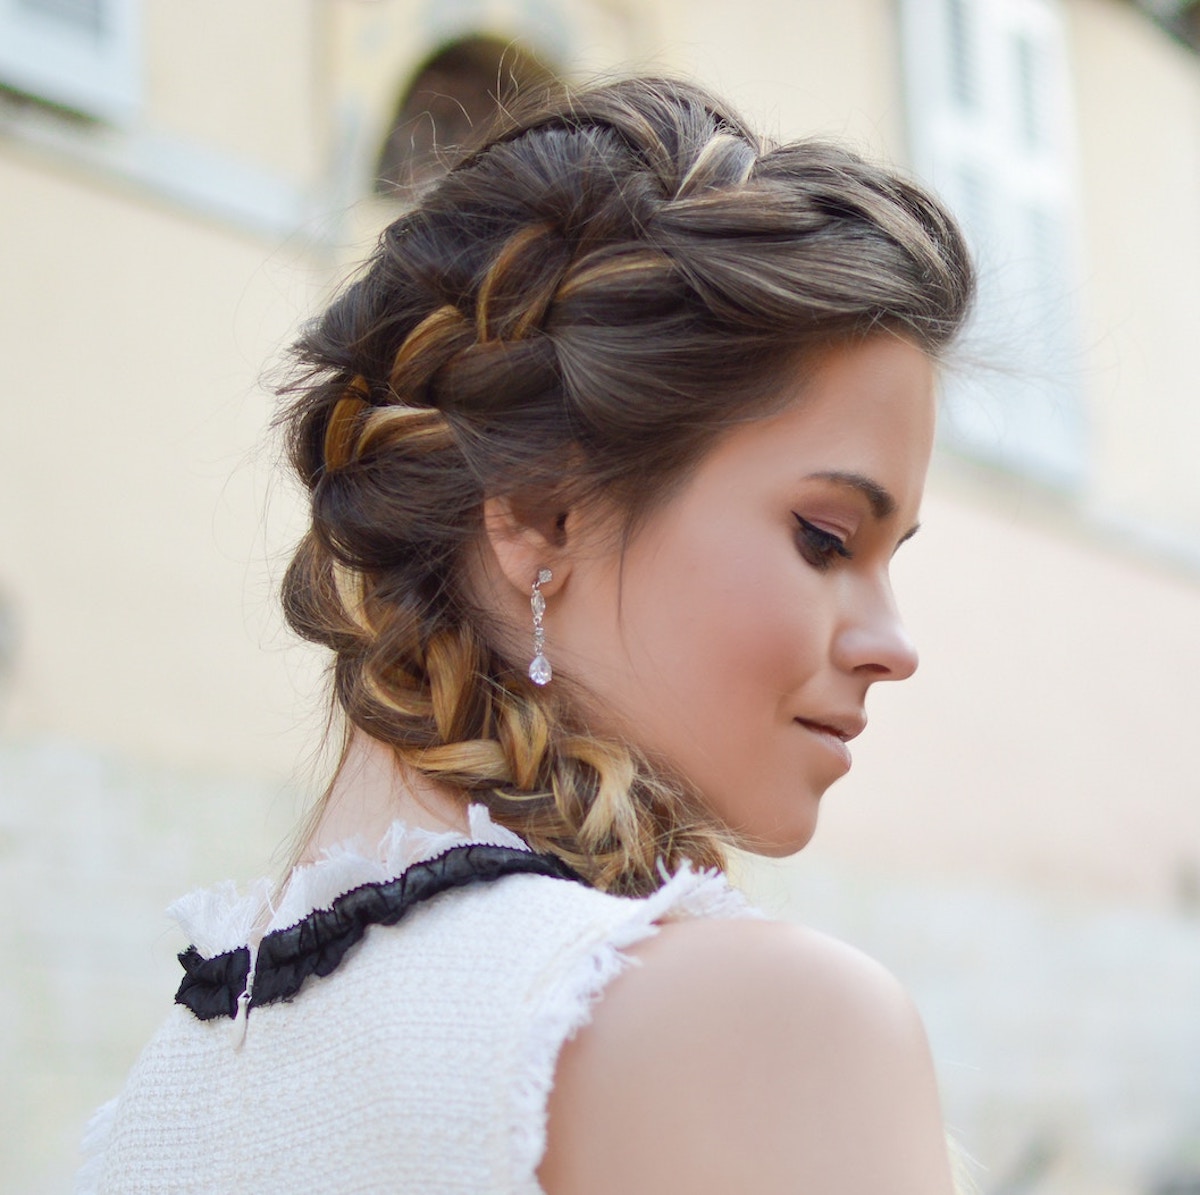 How to French Braid Hair for Beginners